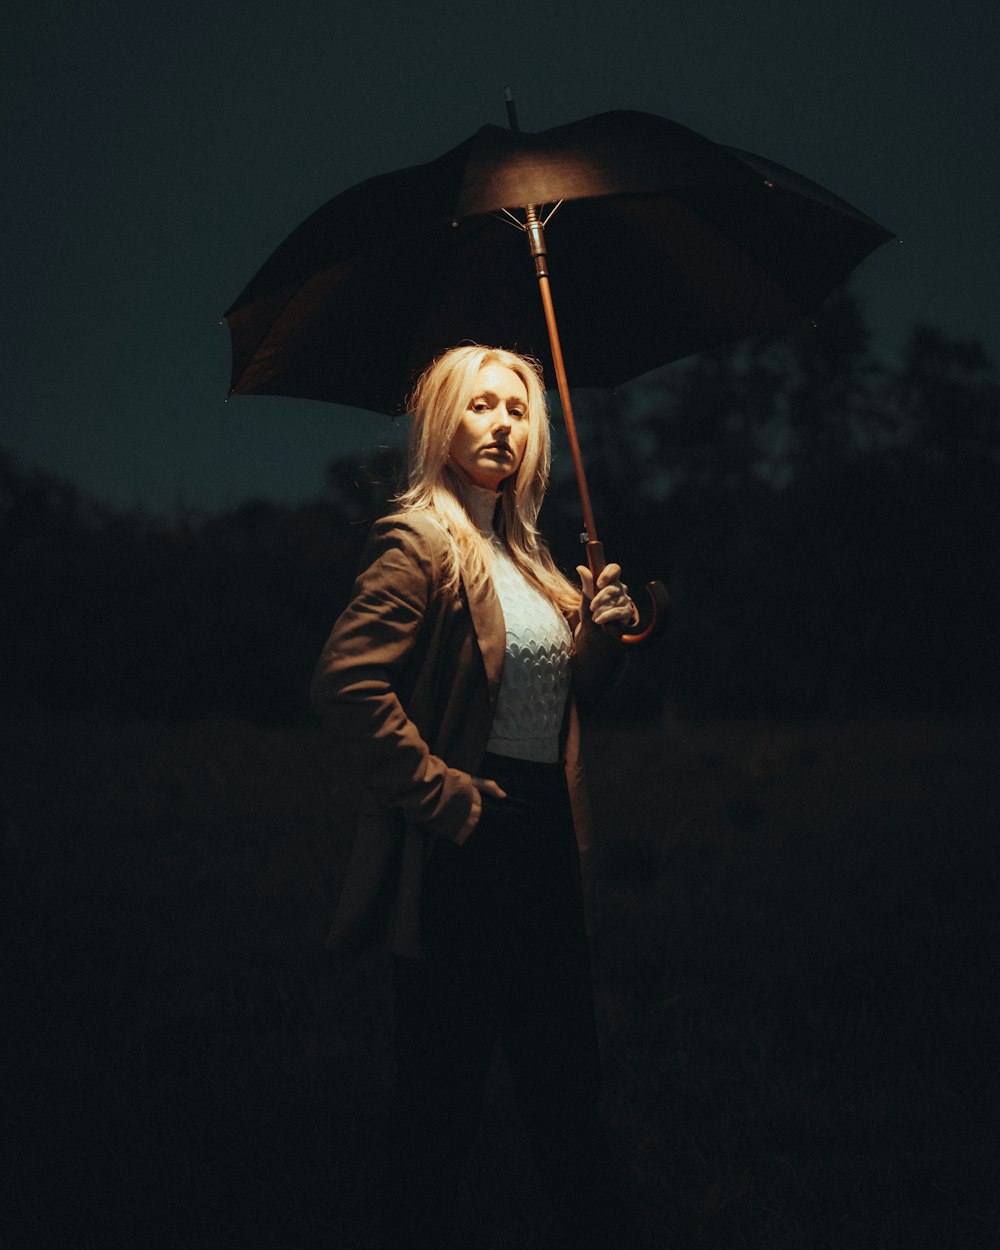 a woman standing in a field holding an umbrella